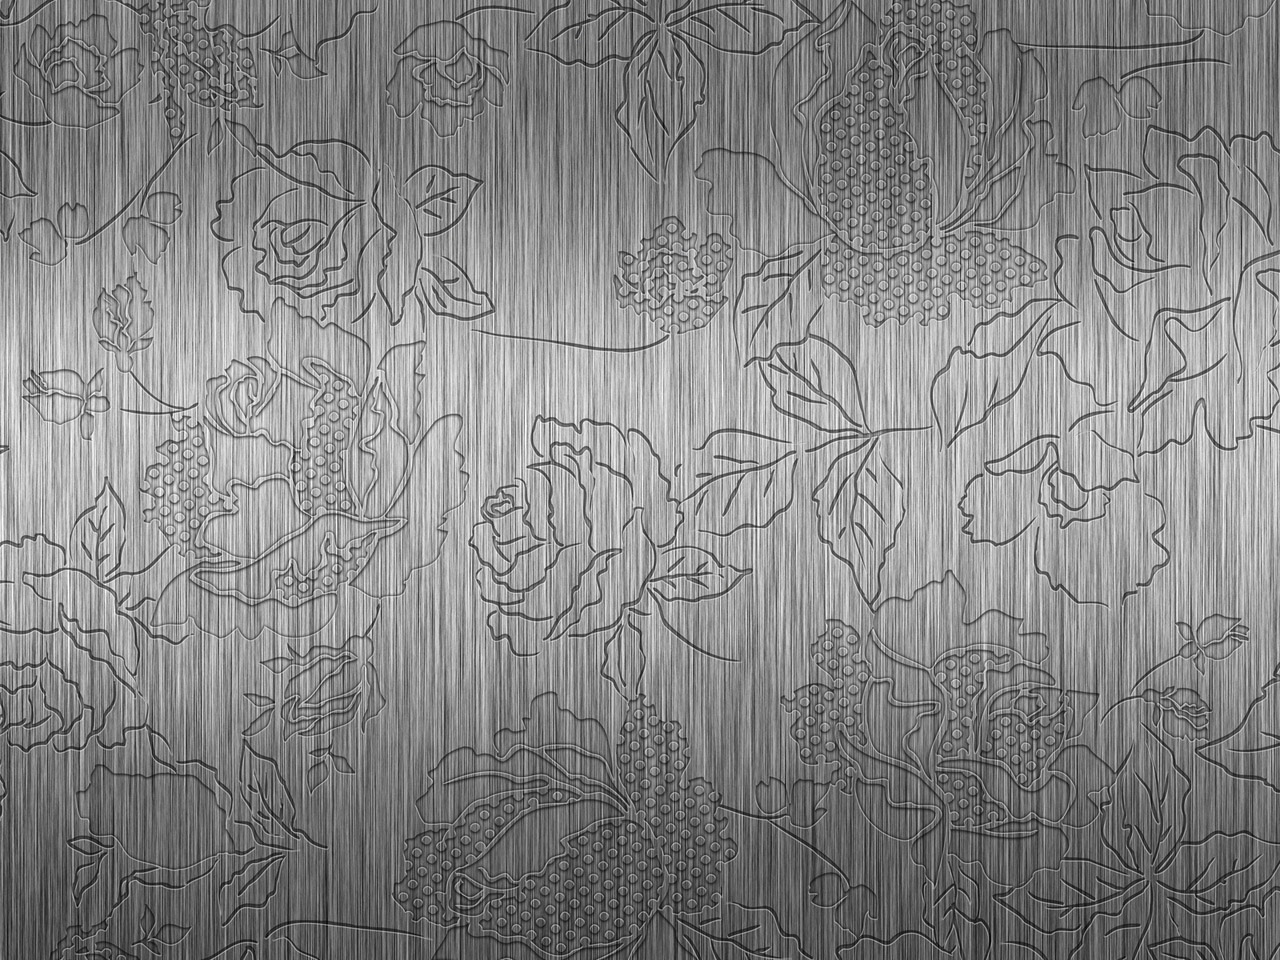 Roses Patterns on Metal backgrounds